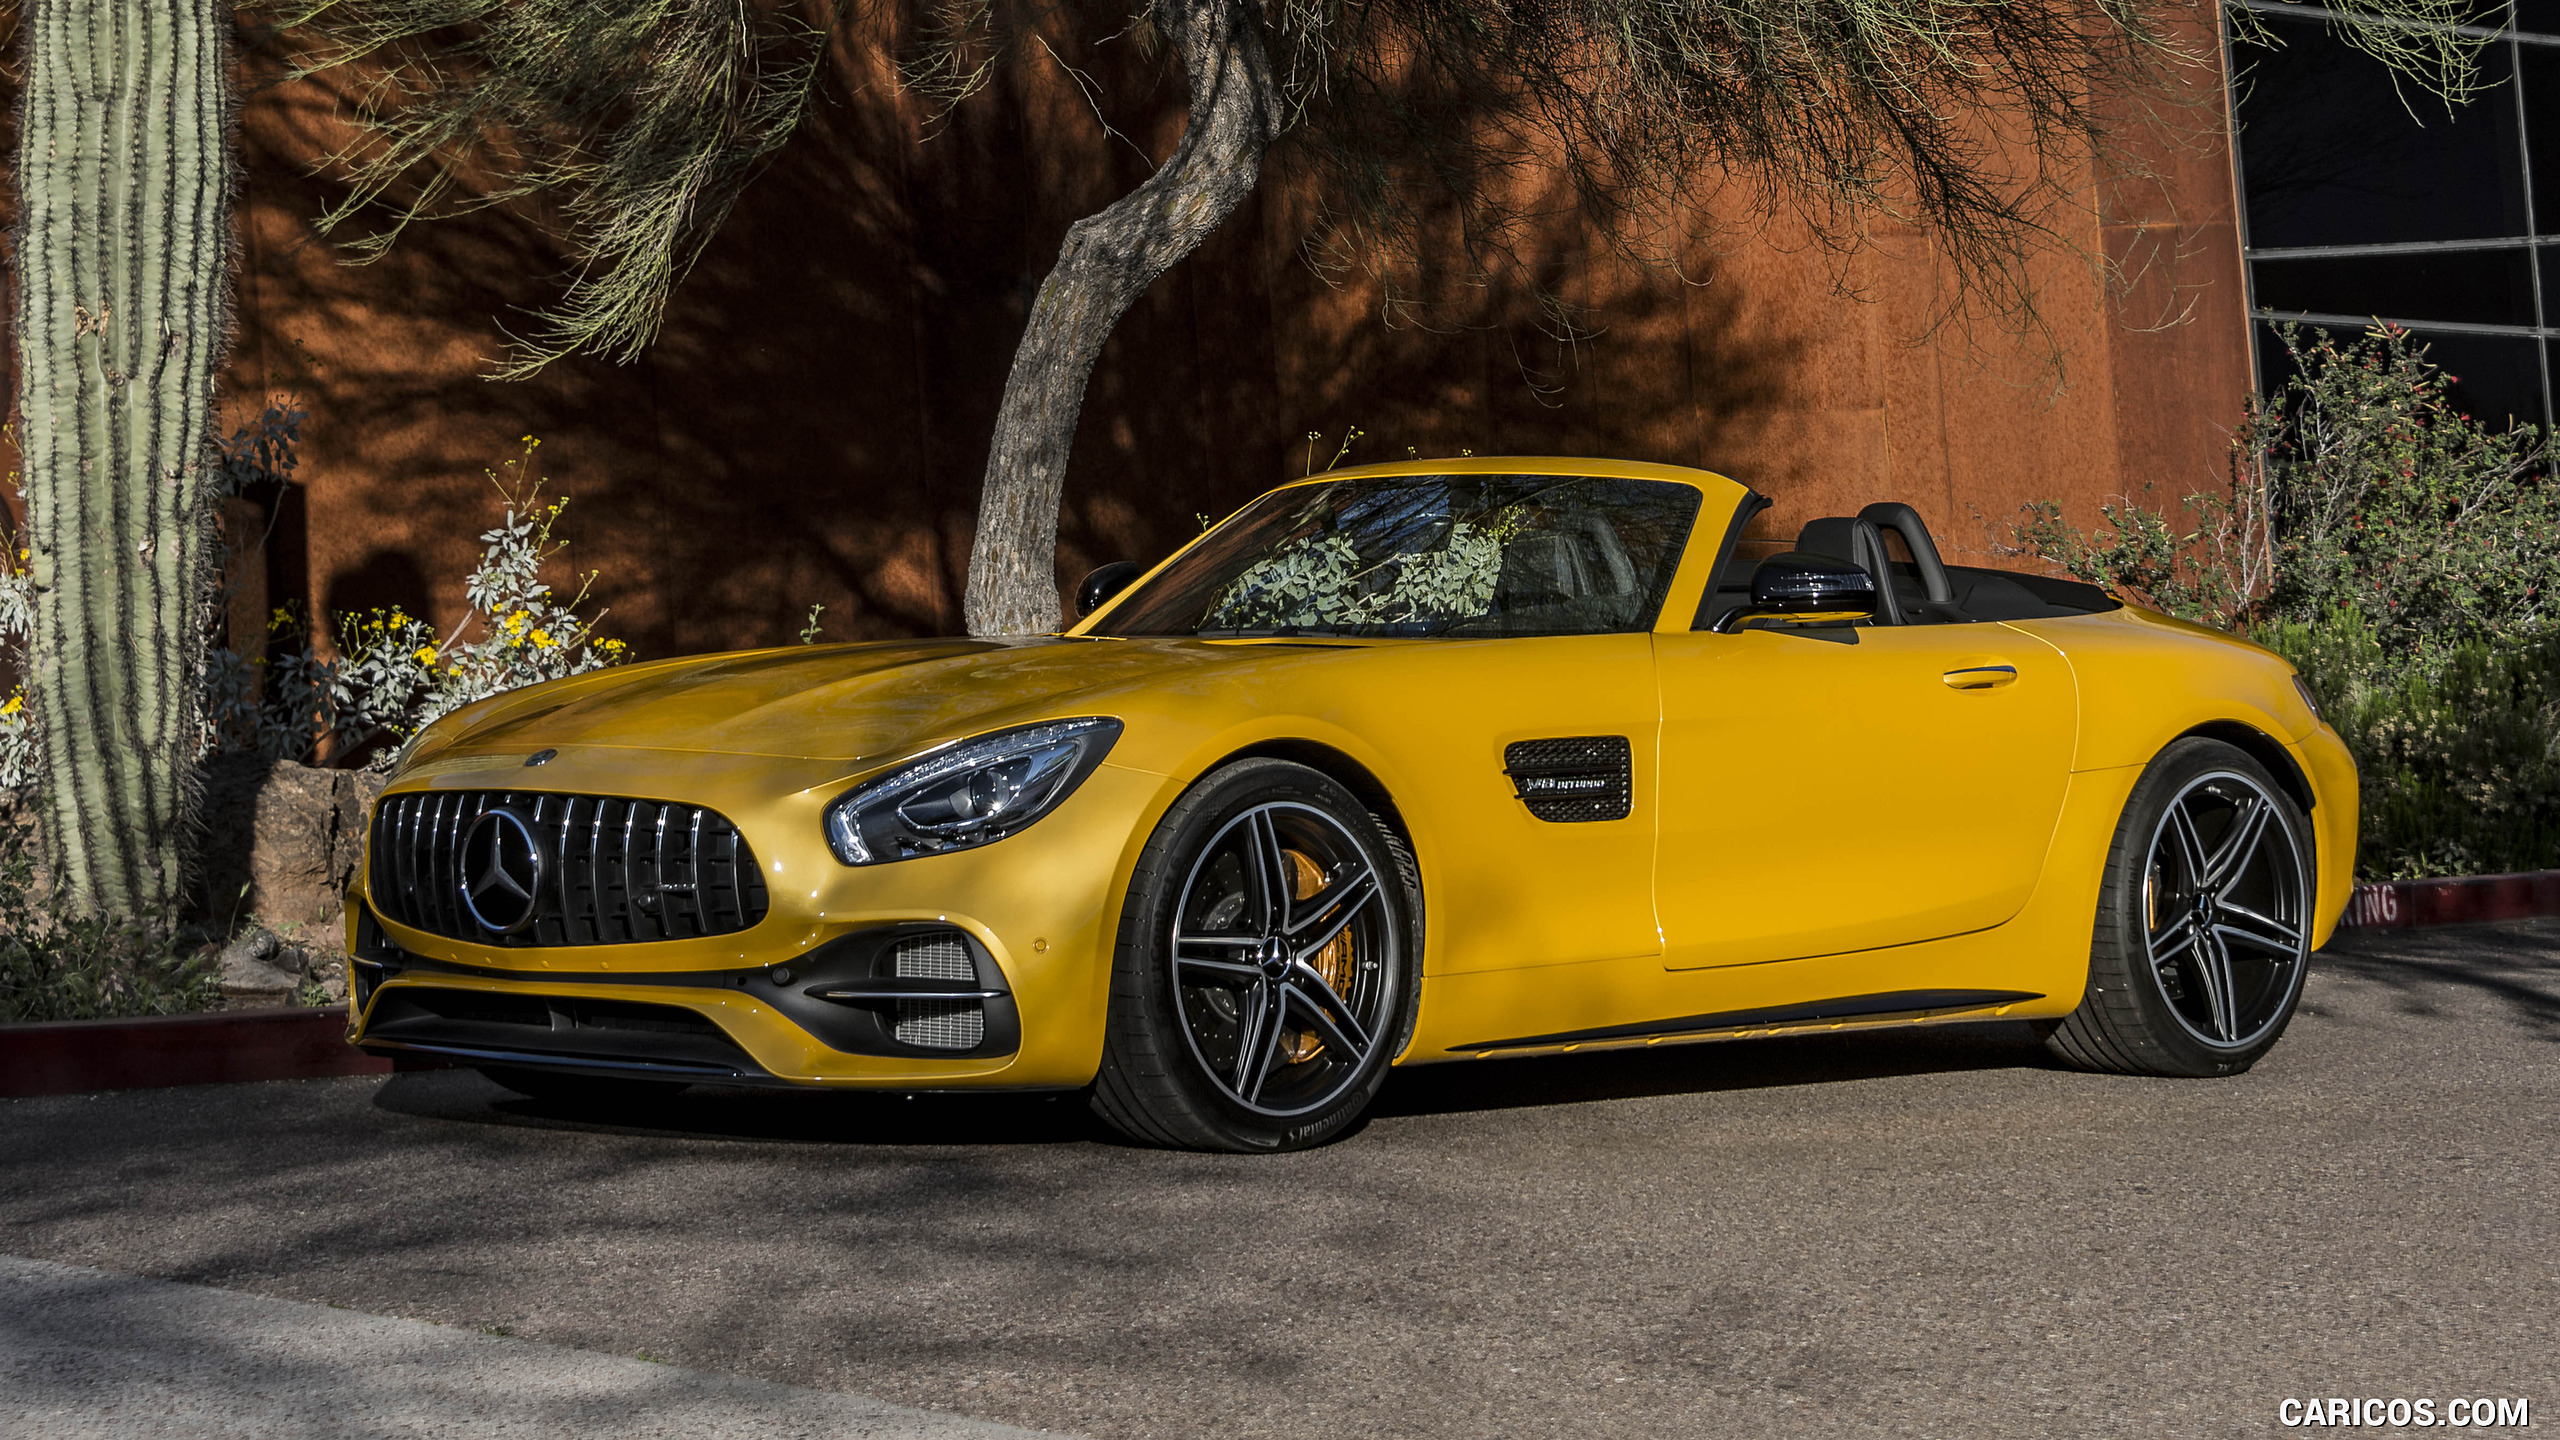 2018 Mercedes-AMG GT C Roadster - Front Three-Quarter, #235 of 350